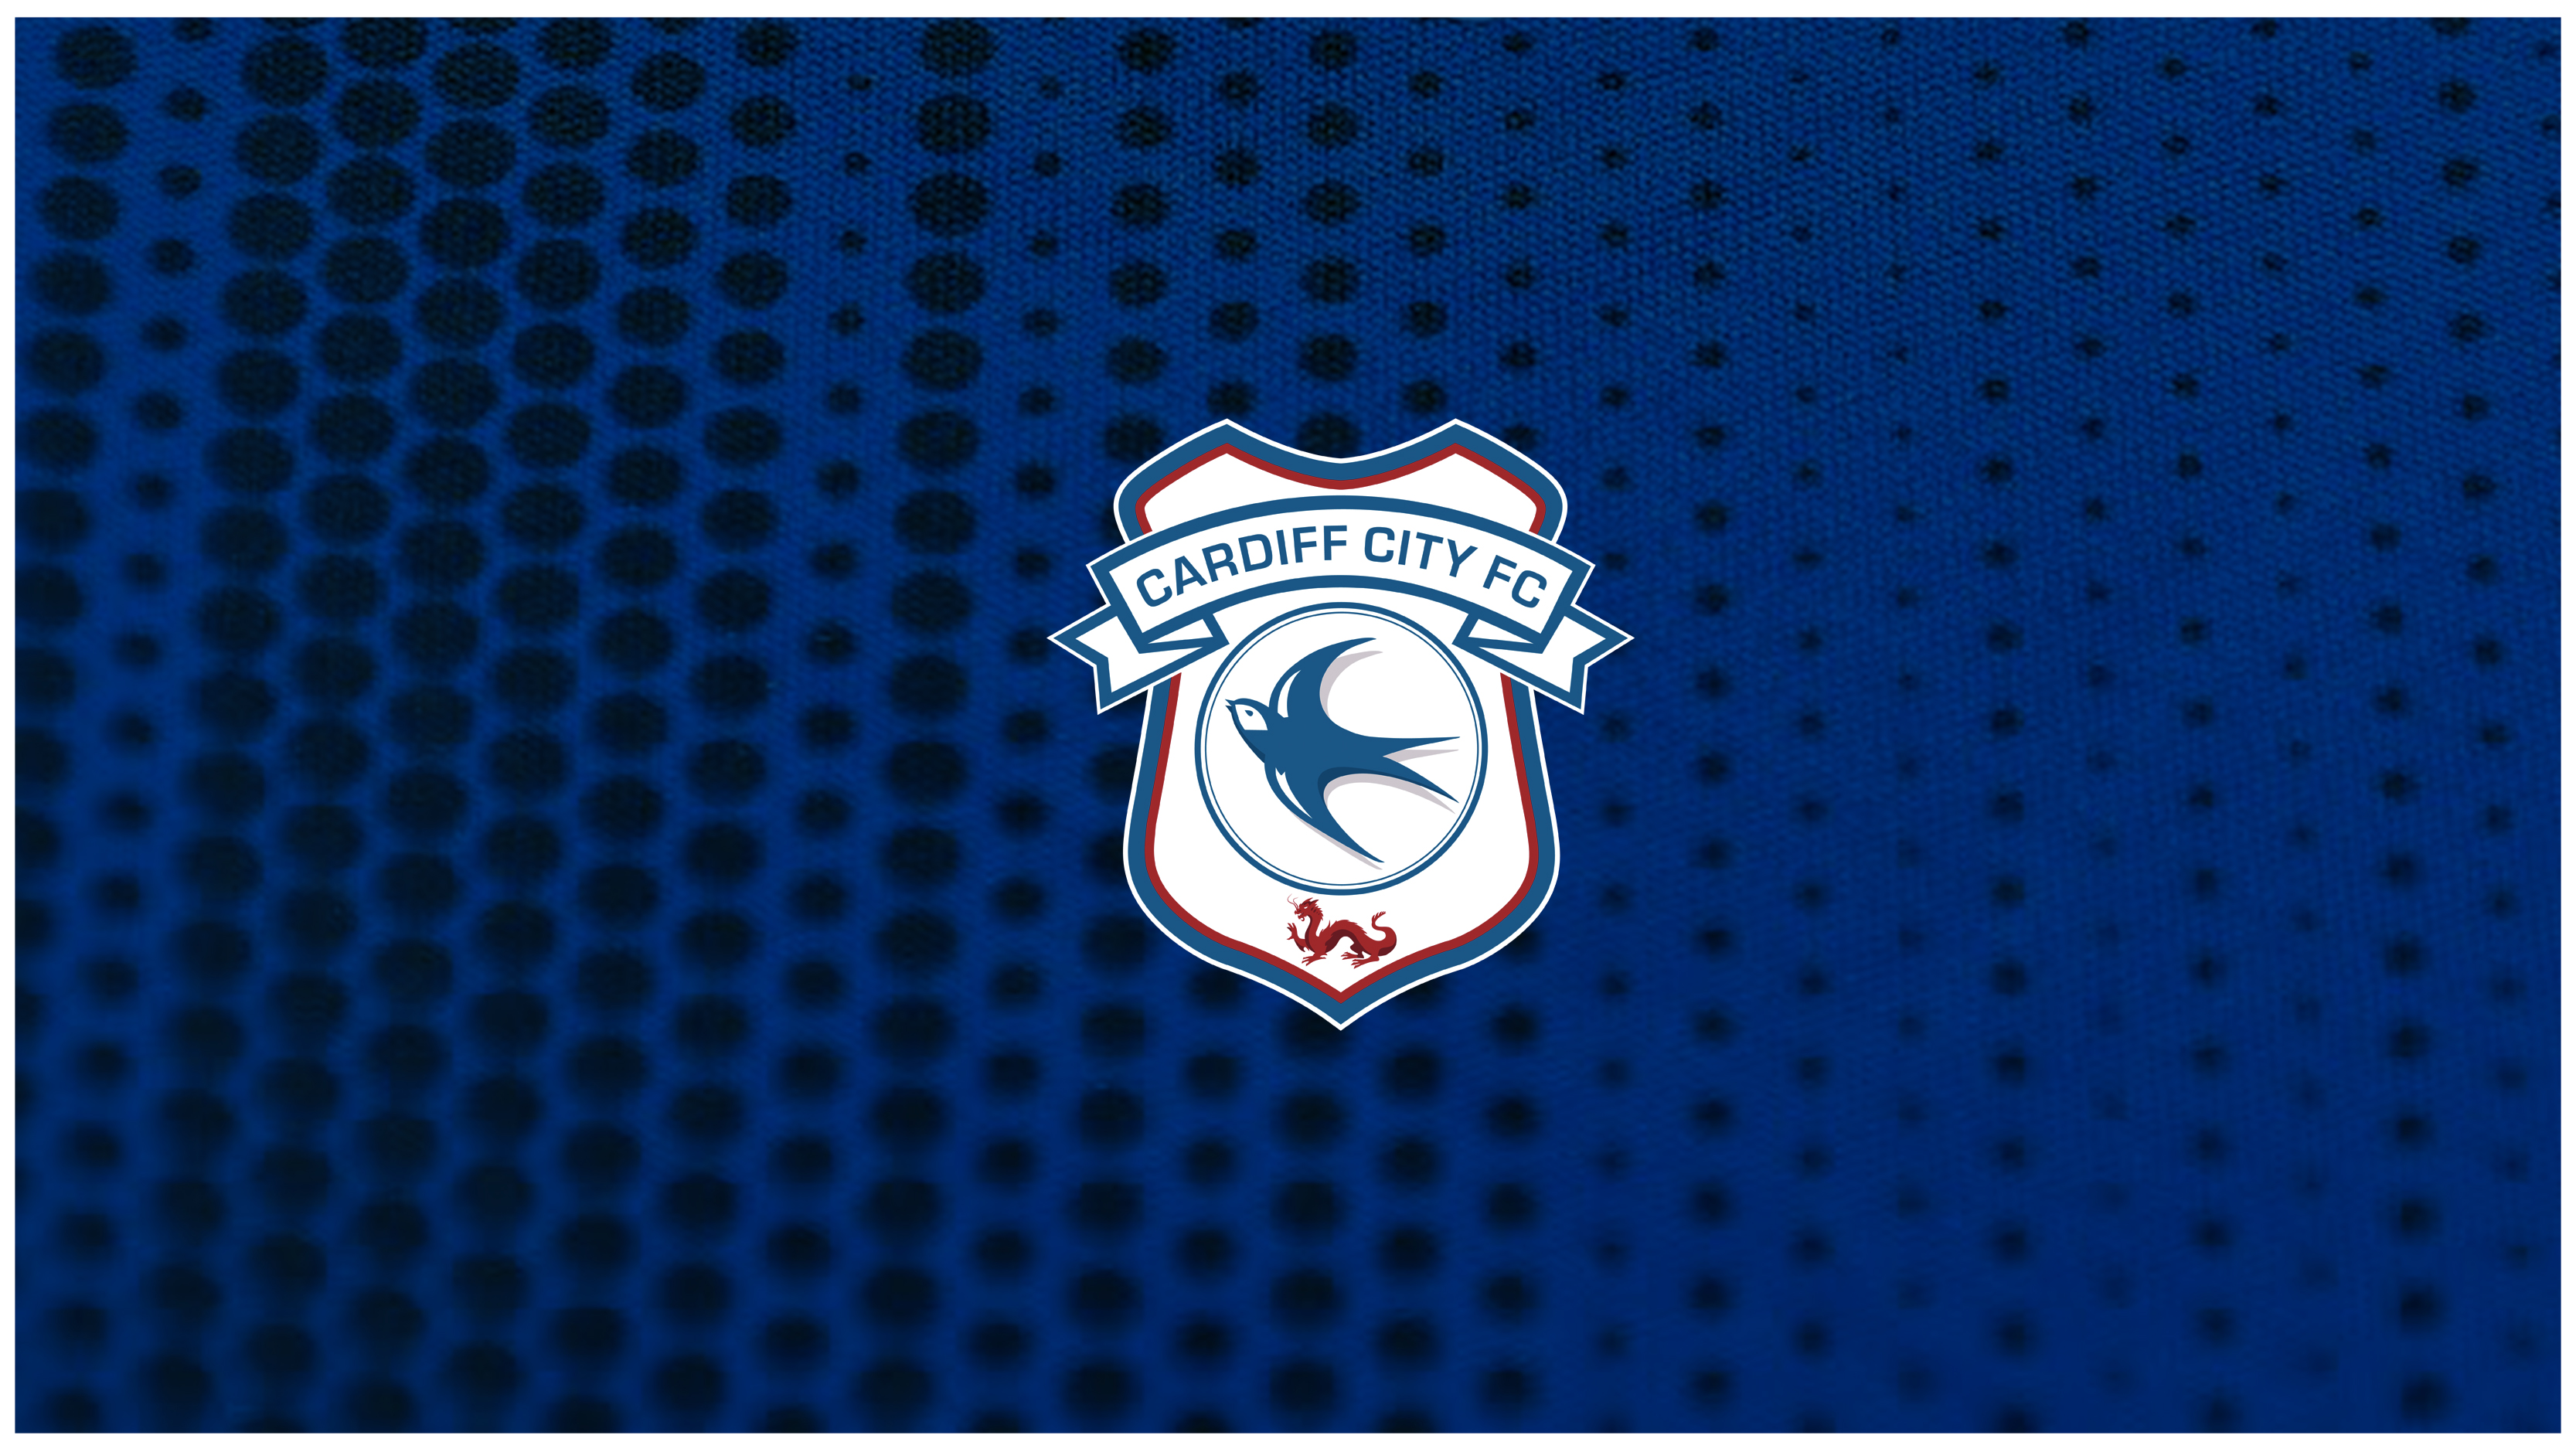 20 Facts About Cardiff City 